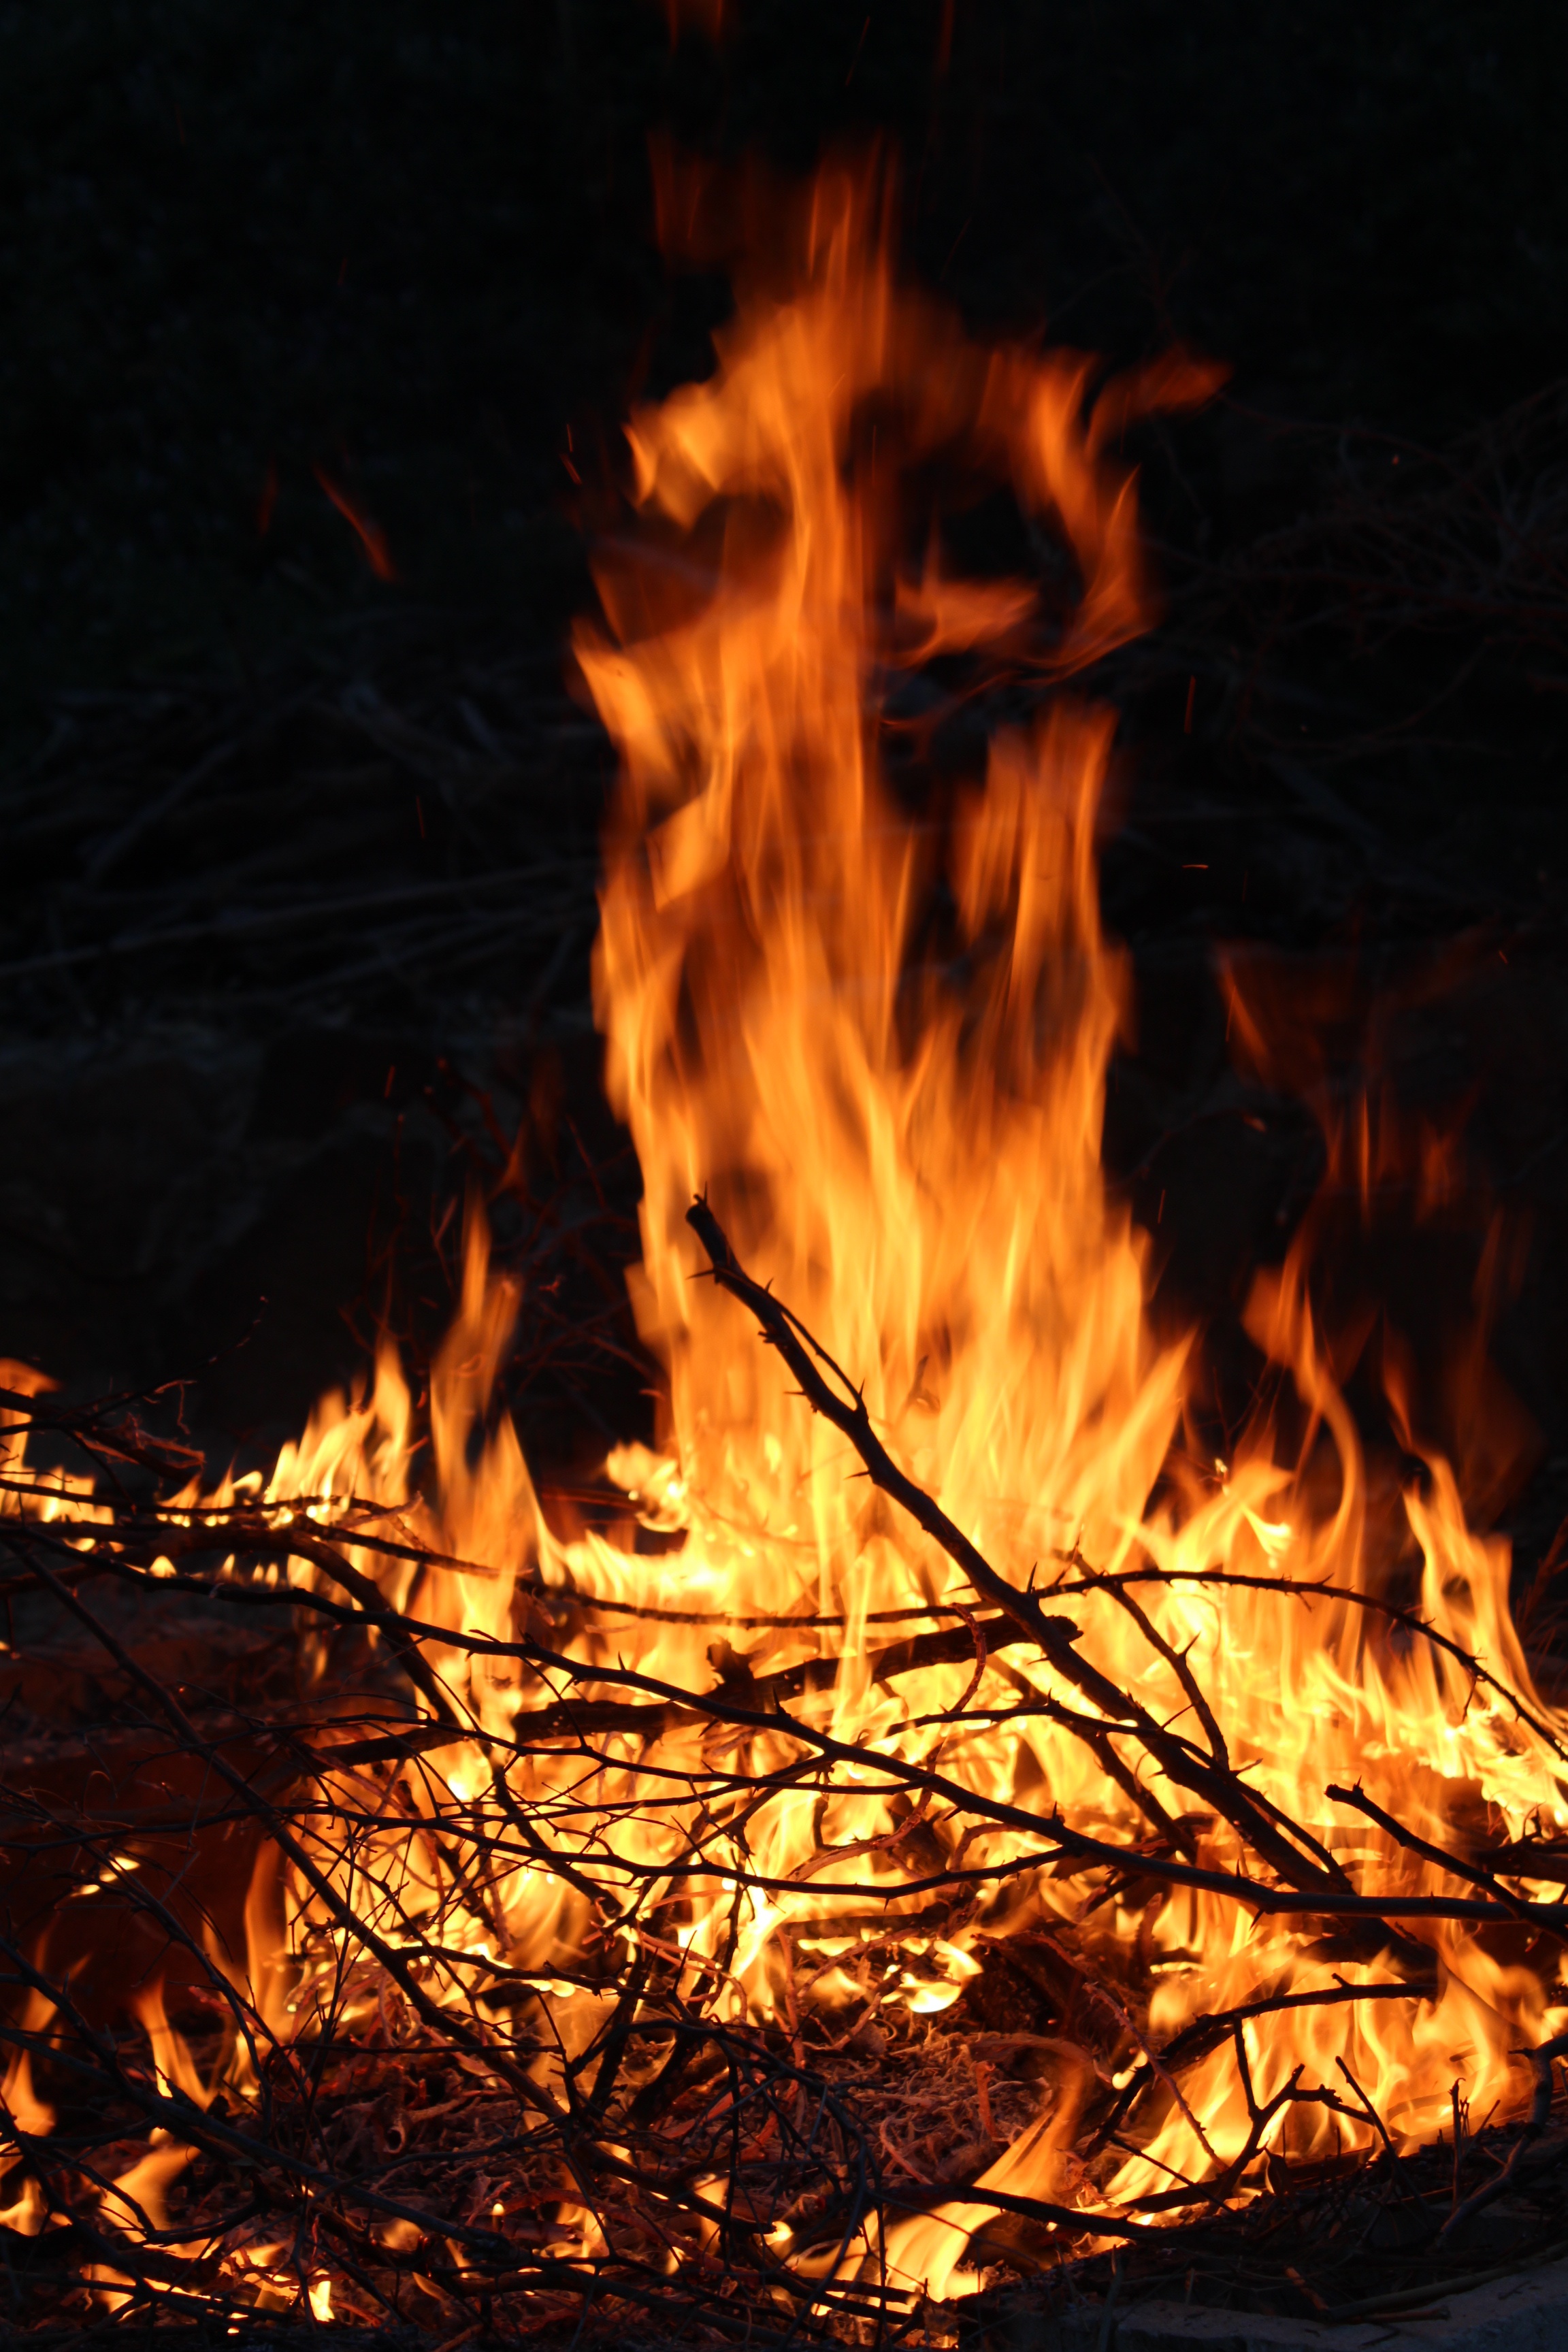 Weekly Photography Challenge - Fire